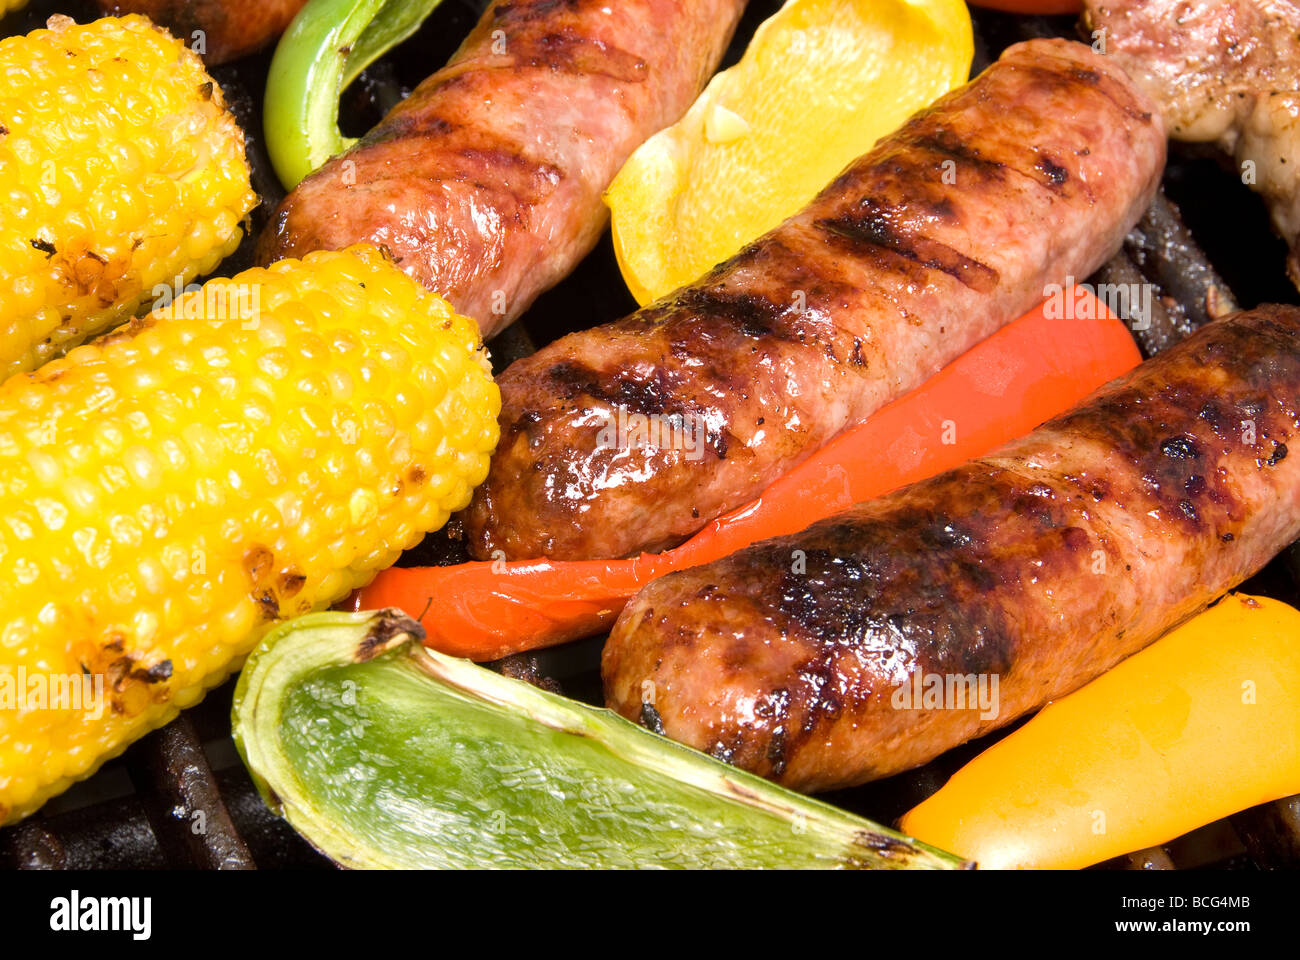 Grilled bratwurst and corn on the cob smothered in bell peppers ready to eat during a picnic Stock Photo